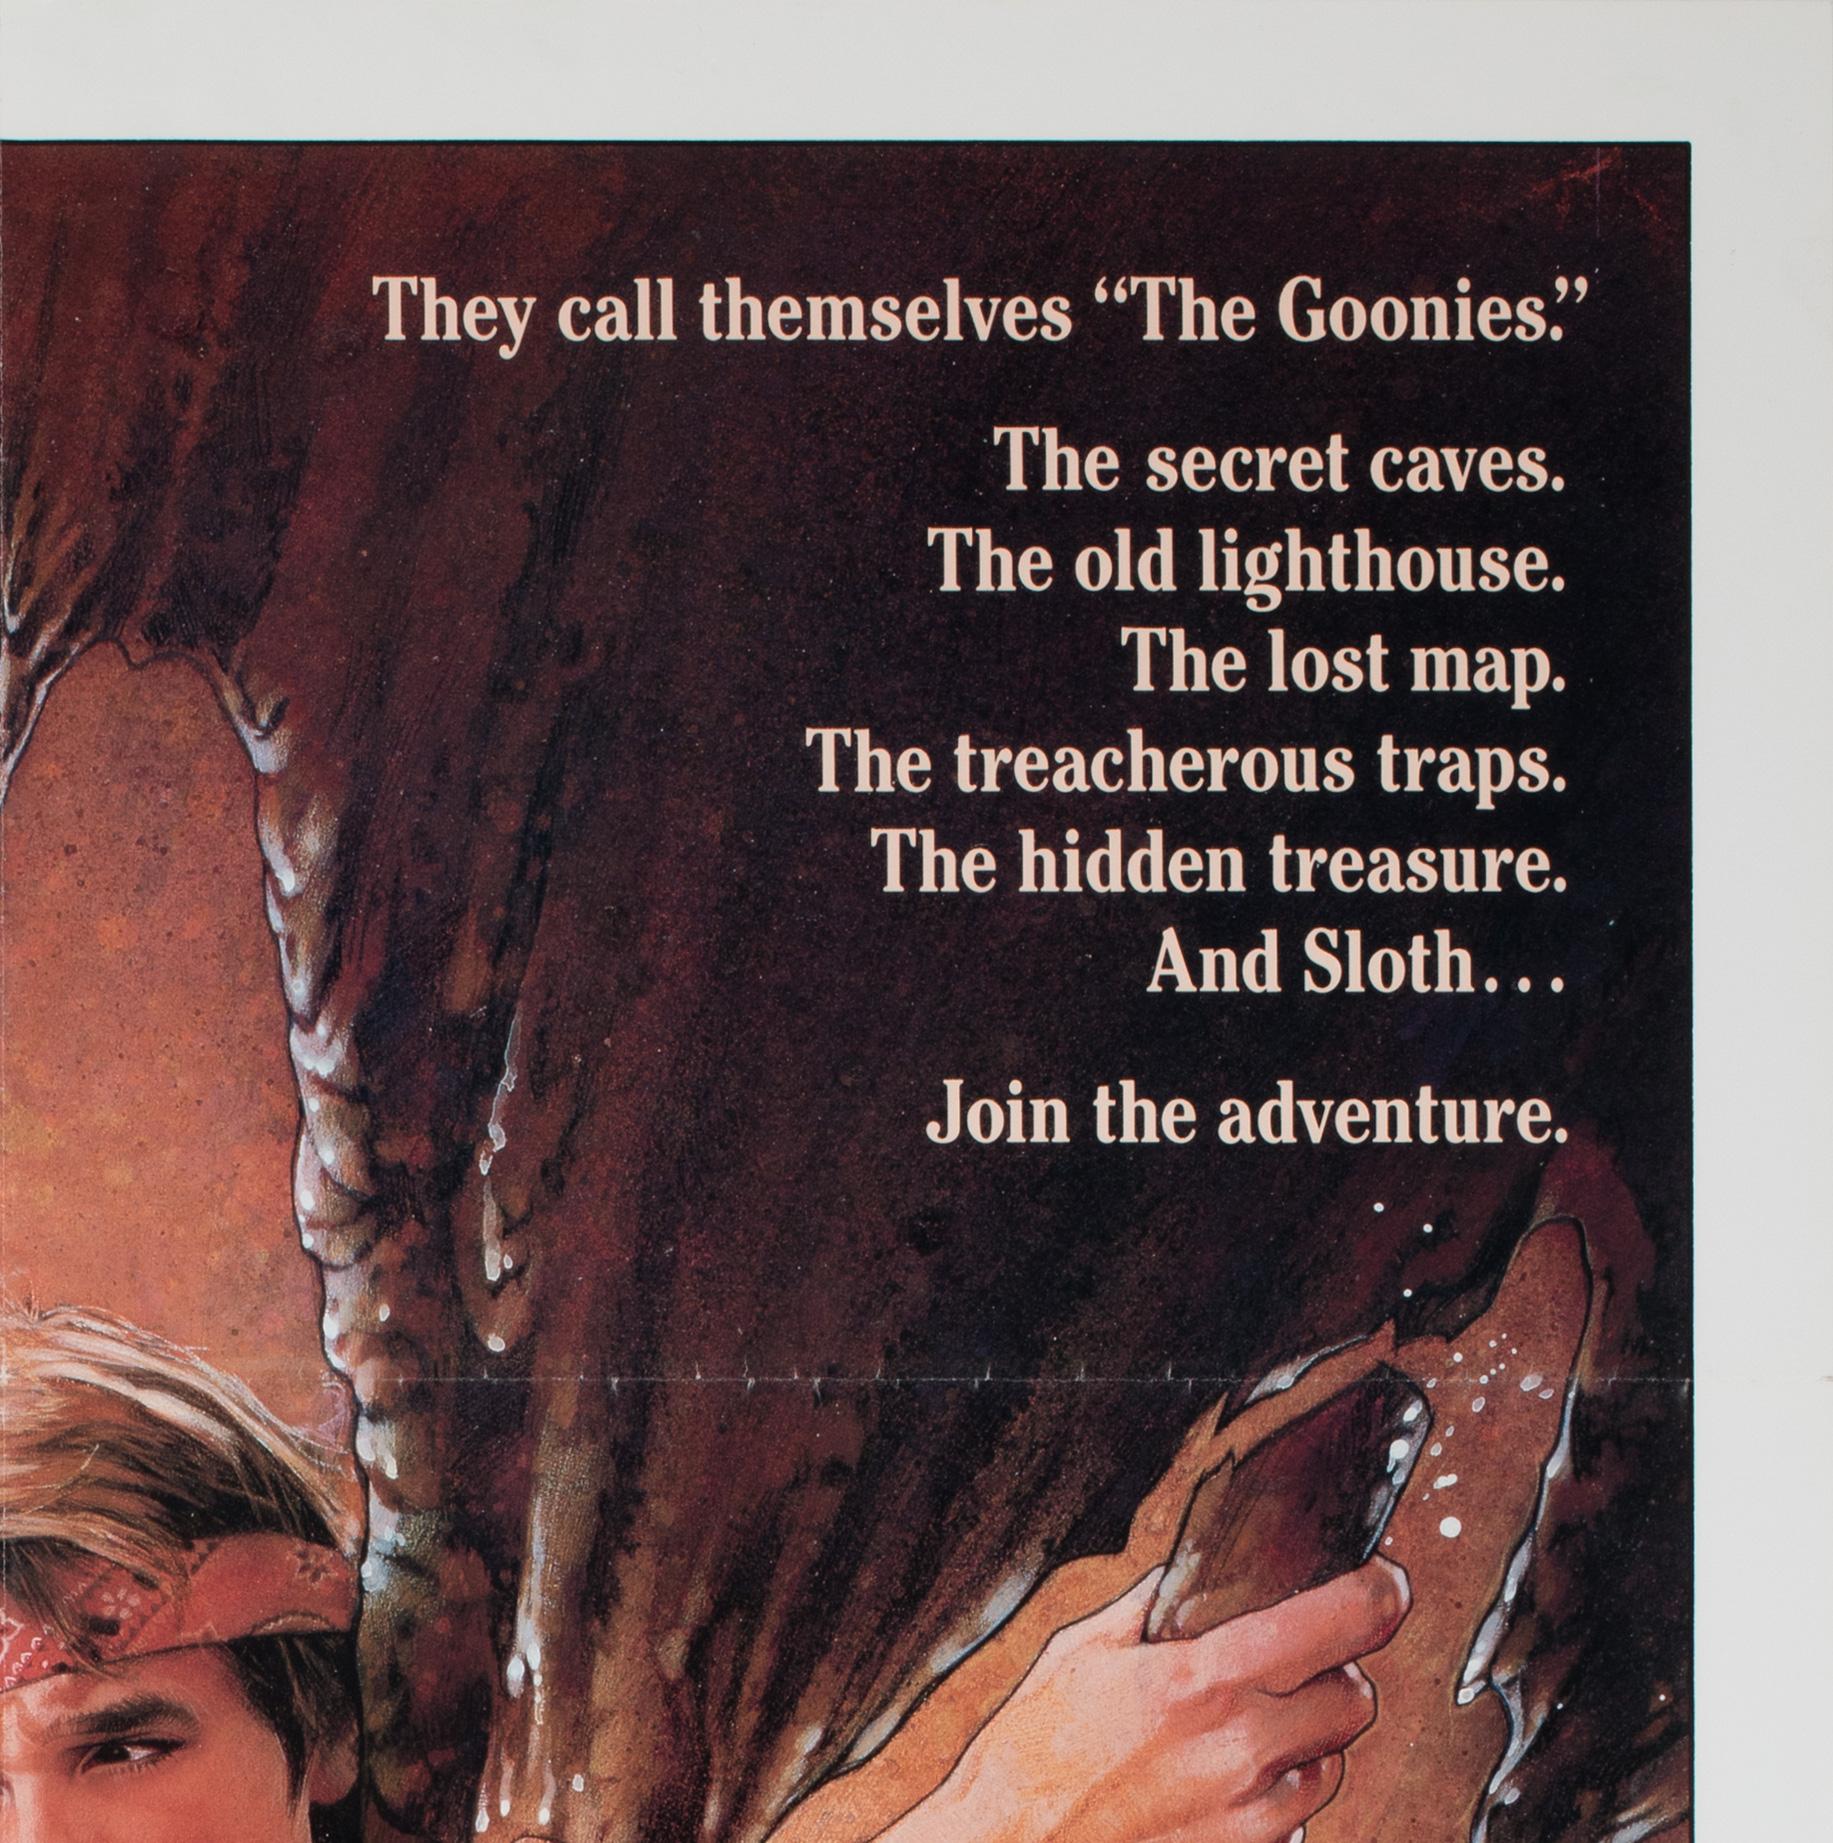 The Goonies 1985 US 1 Sheet Film Movie Poster, DREW STRUZAN In Good Condition For Sale In Bath, Somerset